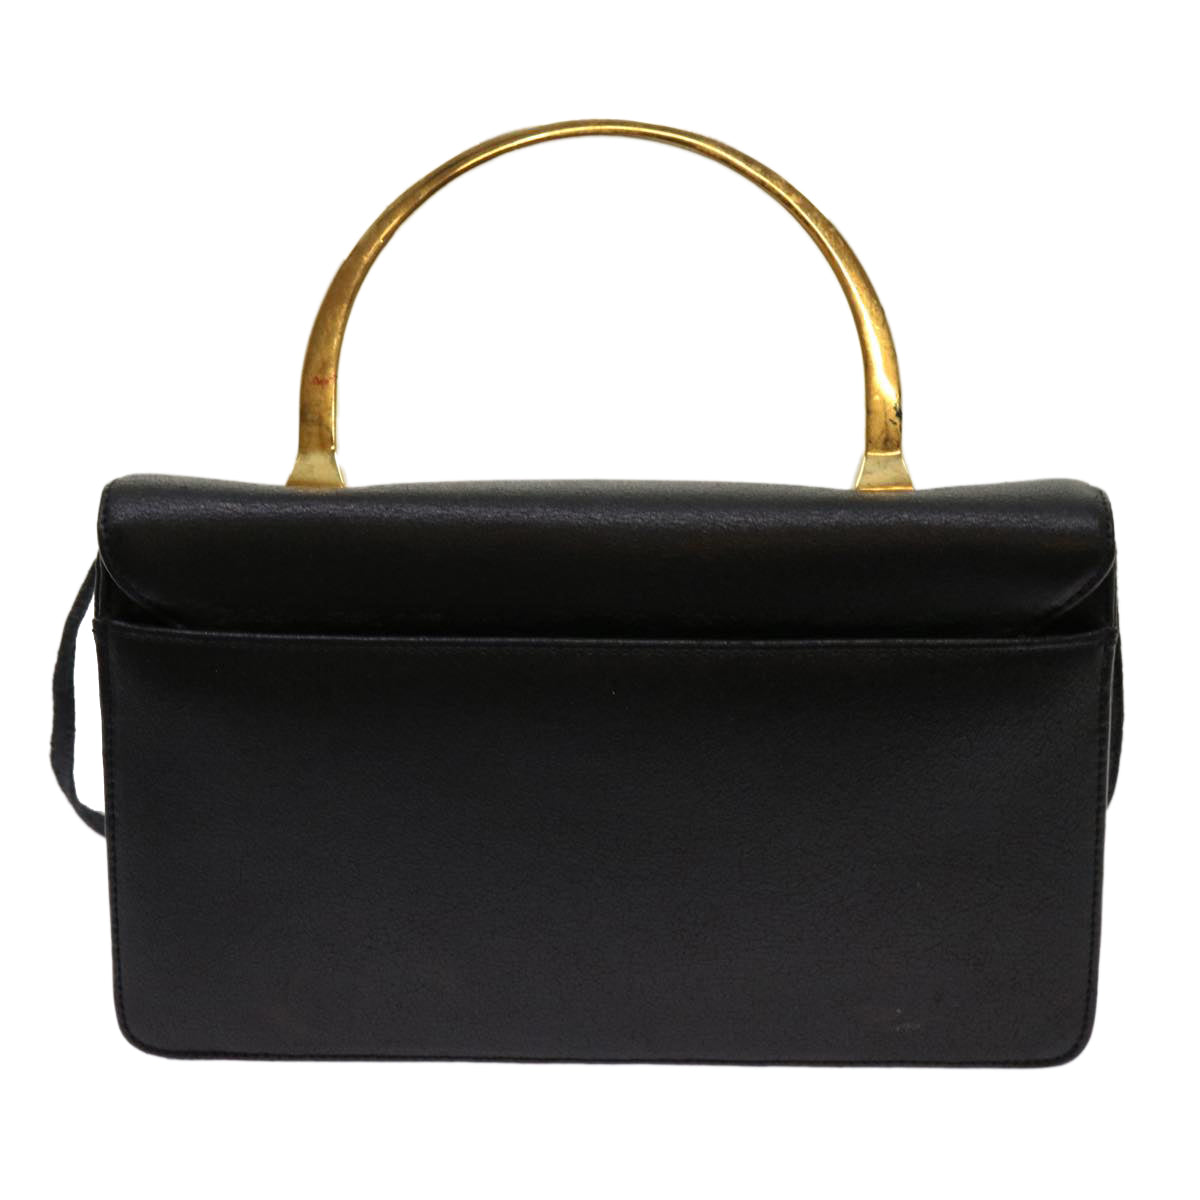 GIVENCHY Hand Bag Leather Black Auth bs13052